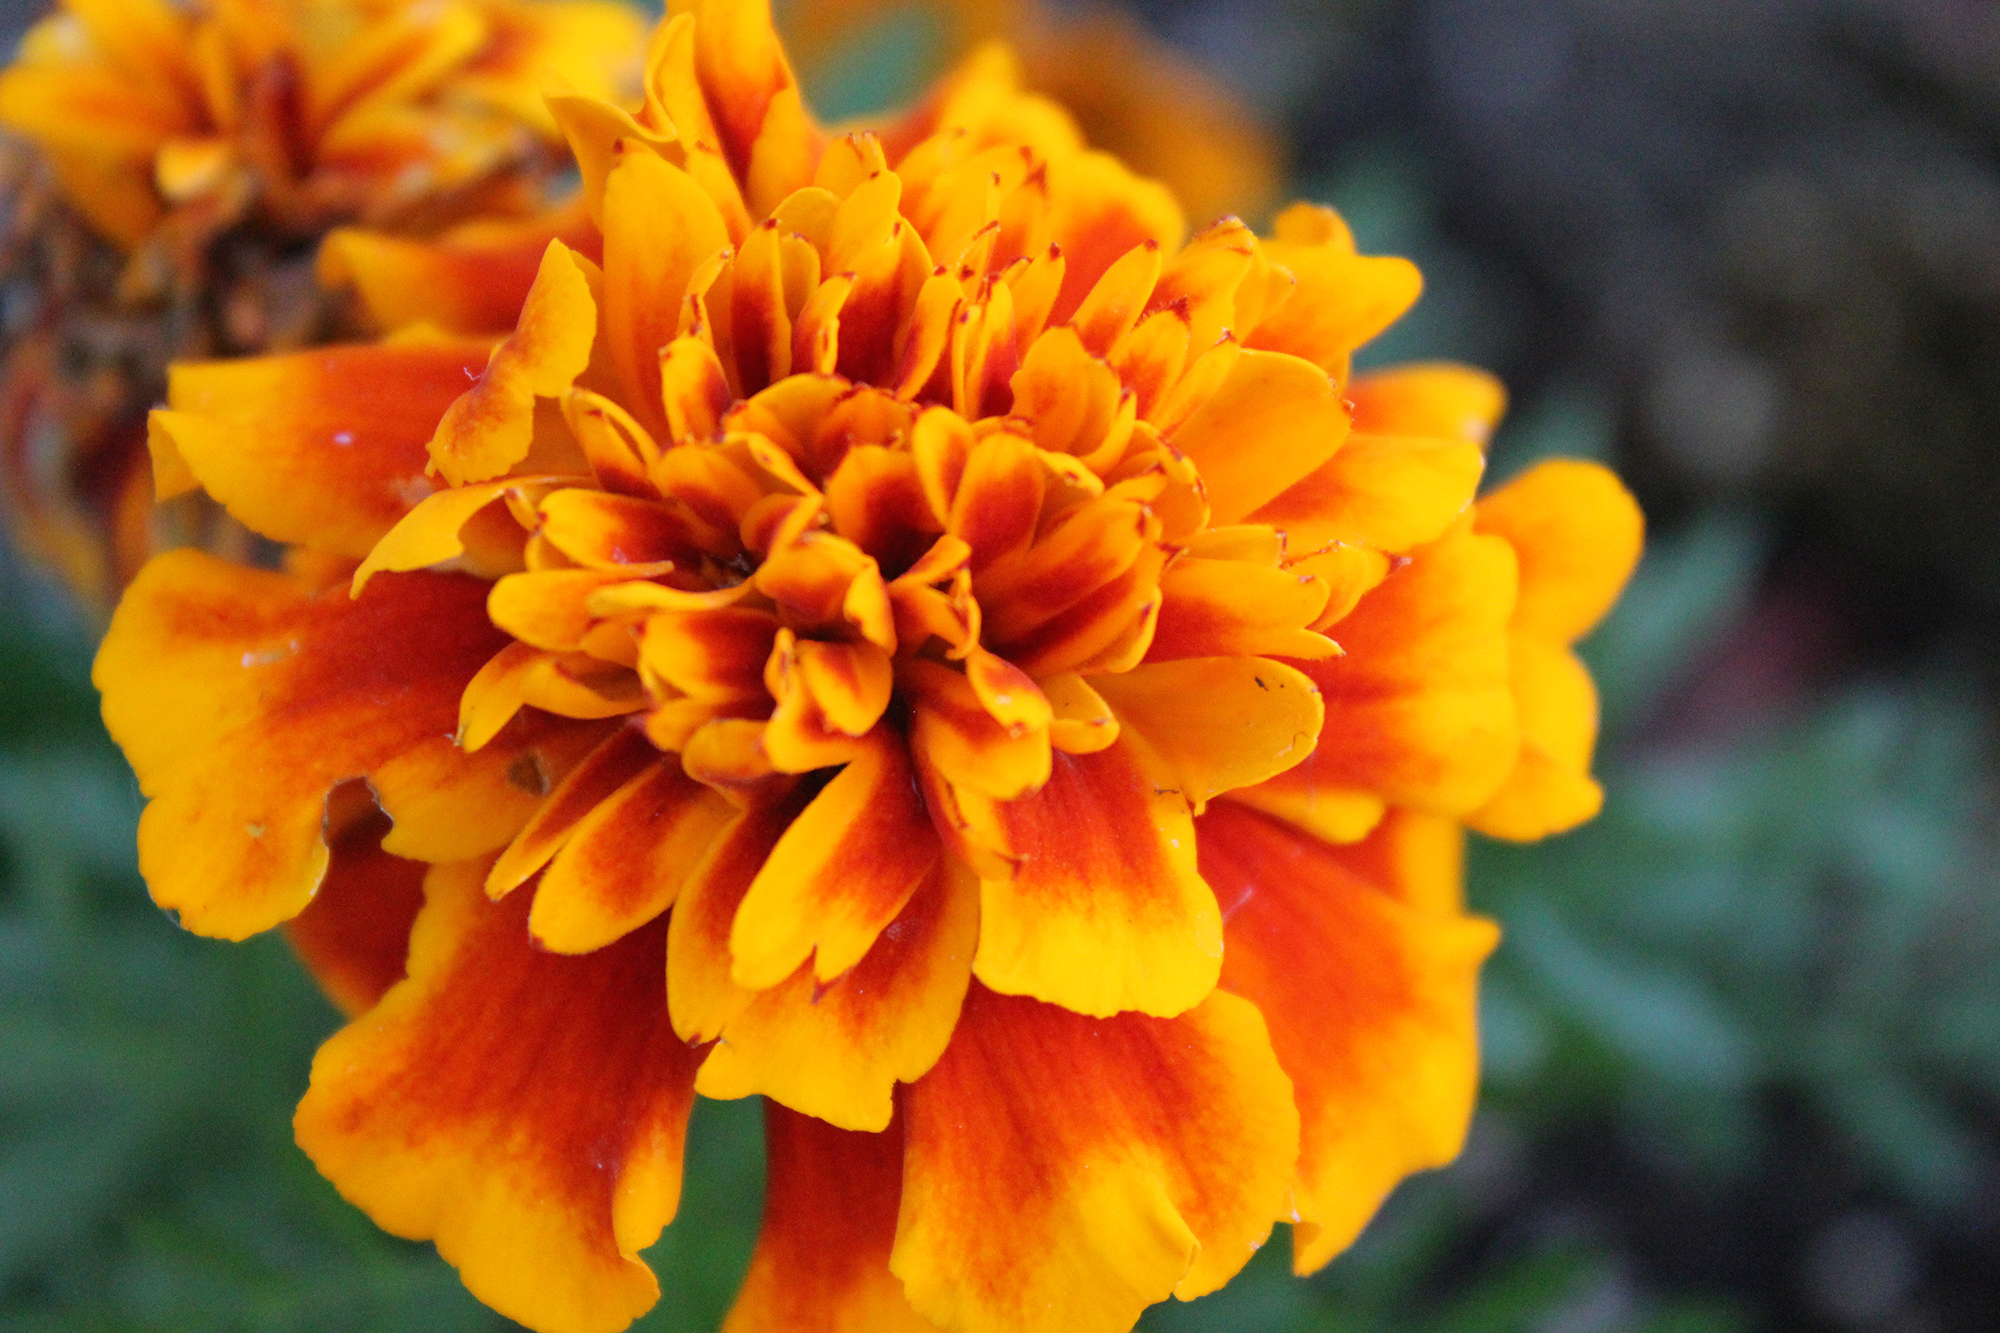 Image of Carrot and marigold flower close up